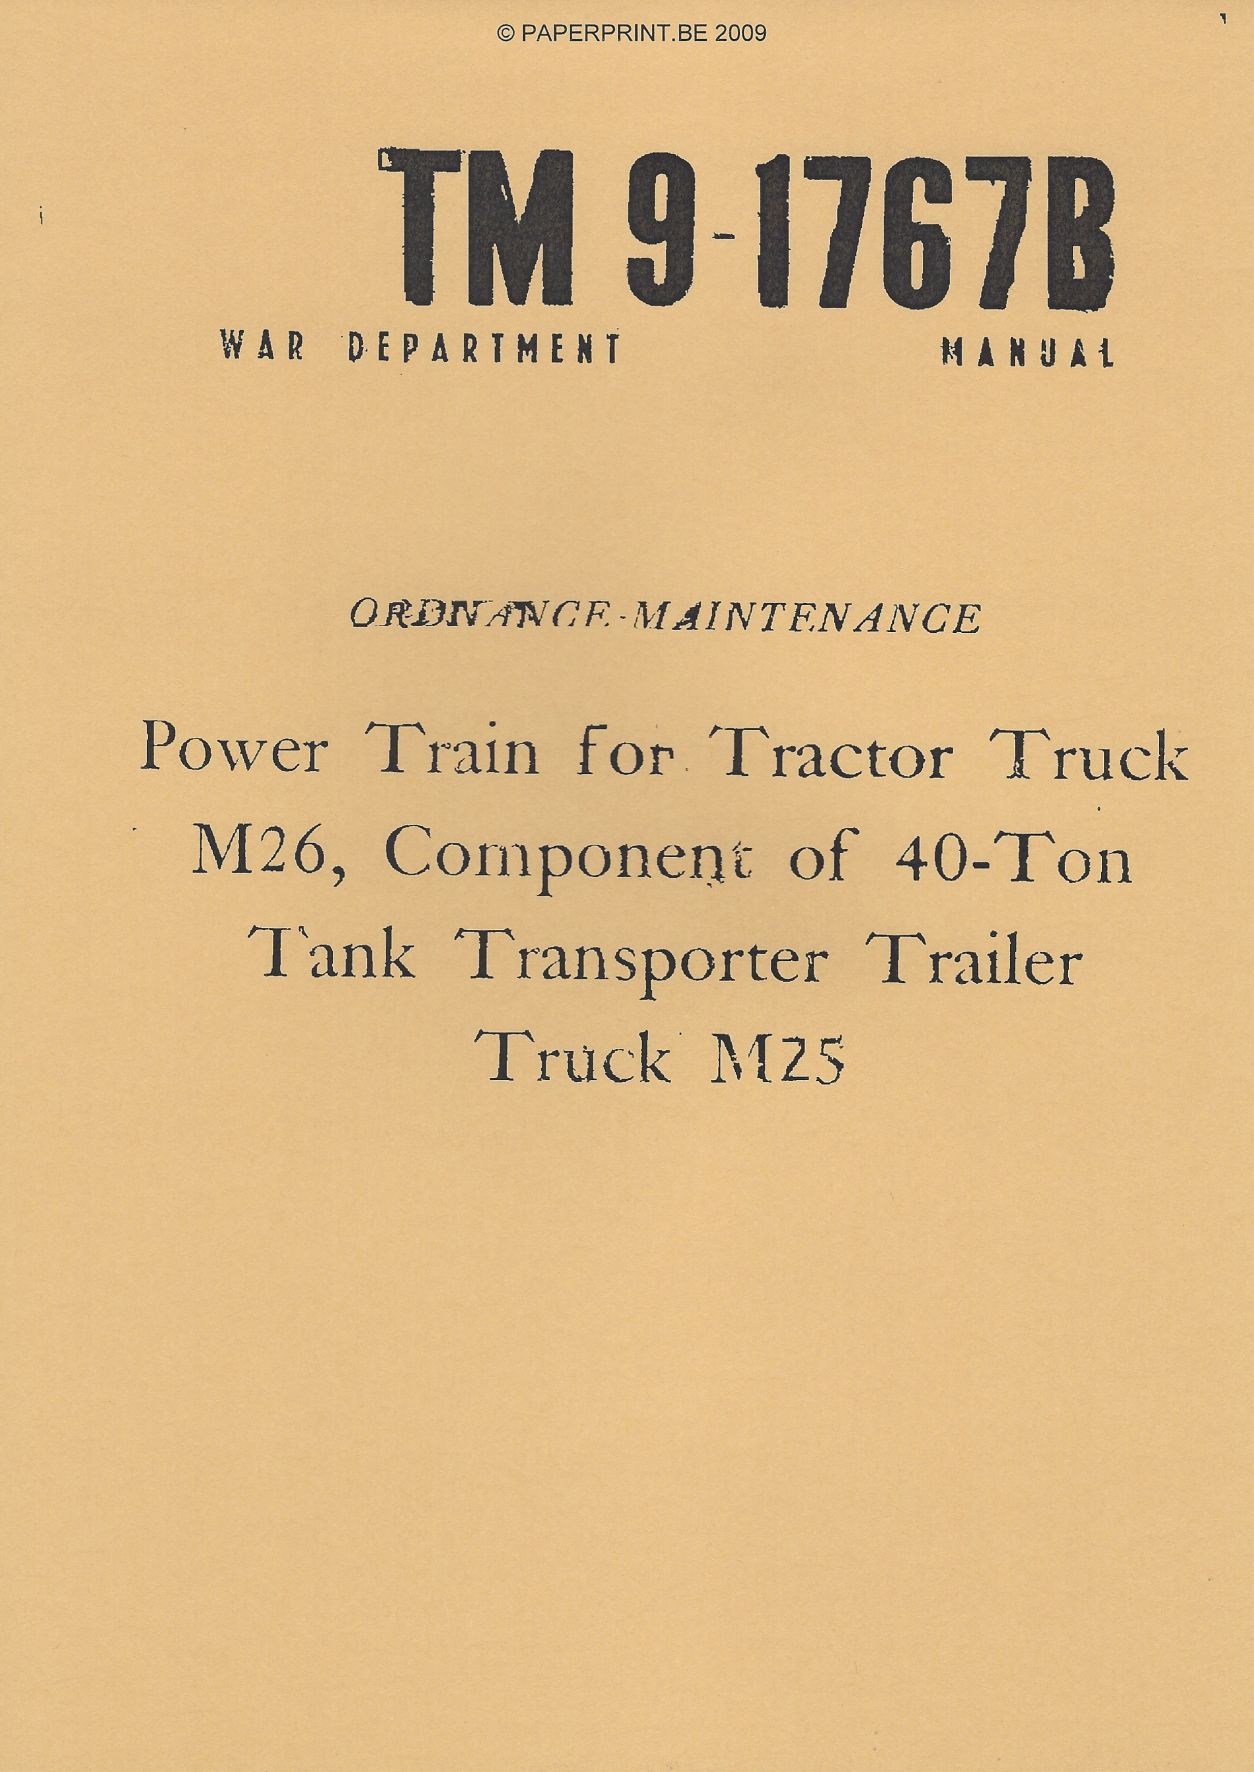 TM 9-1767B US POWER TRAIN FOR TRACTOR TRUCK M26, COMPONENT OF 40-TON TANK TRANSPORT TRAILER TRUCK M25